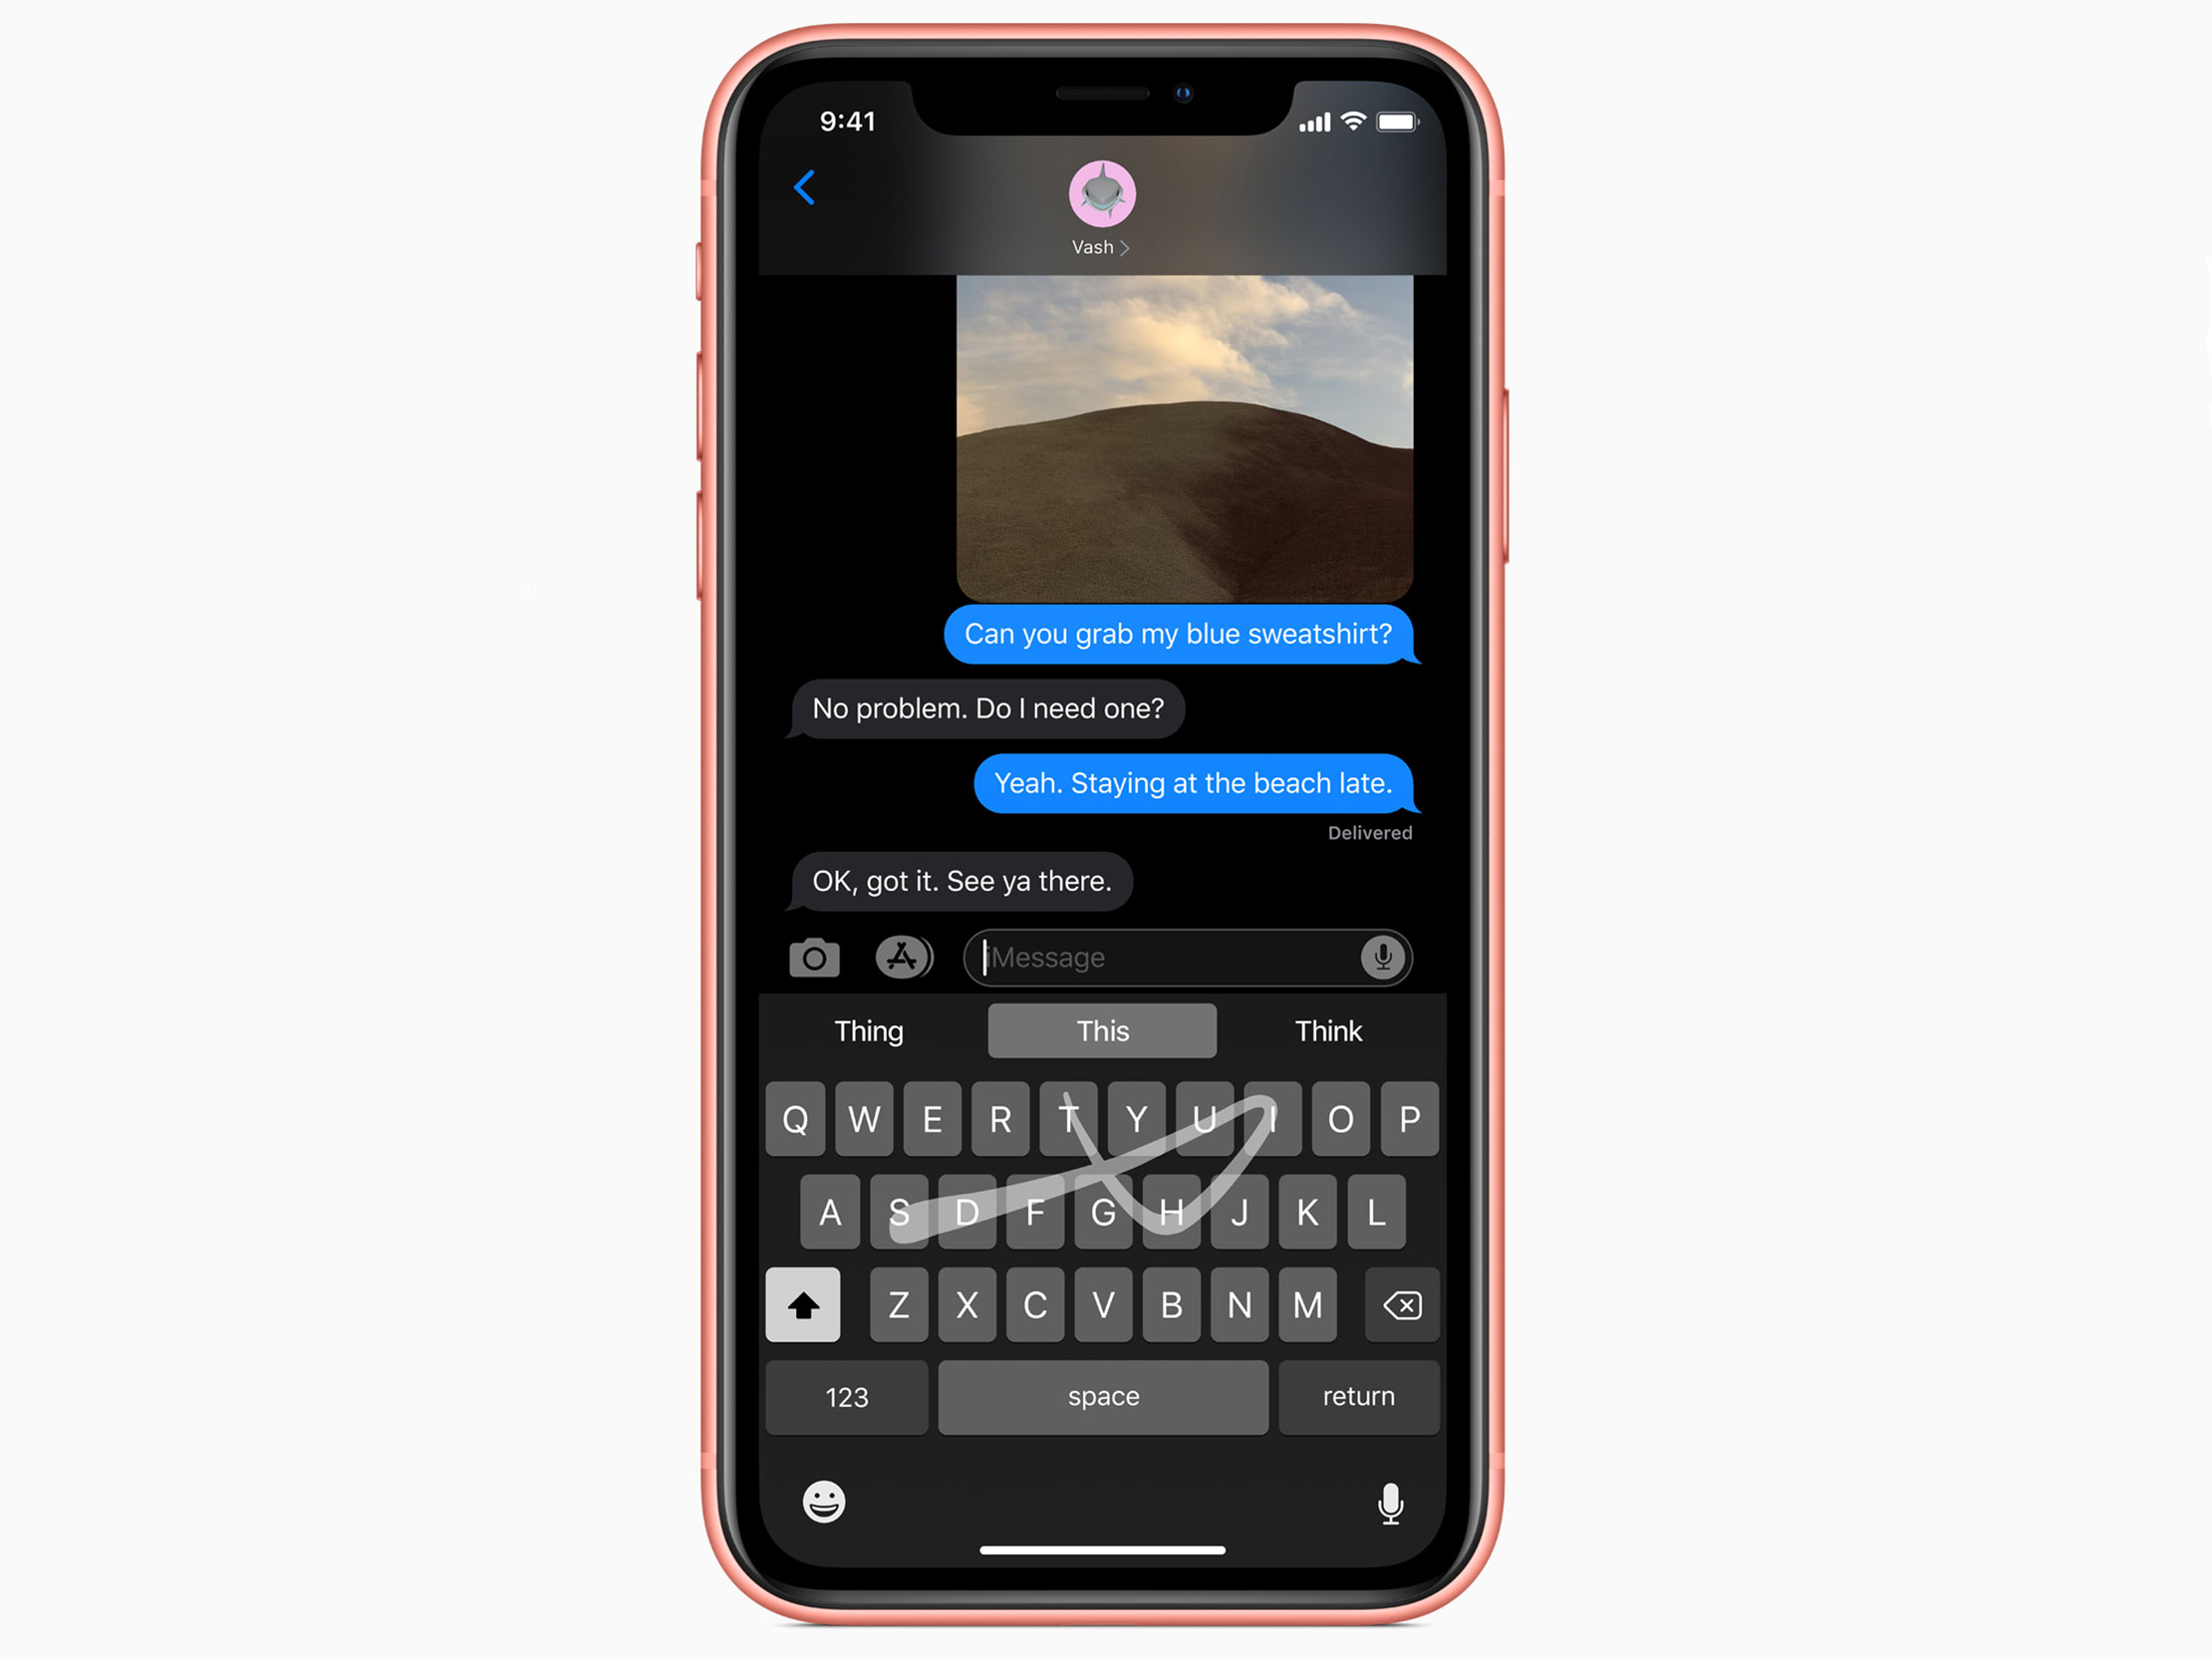 iOS 13 Quickpath typing